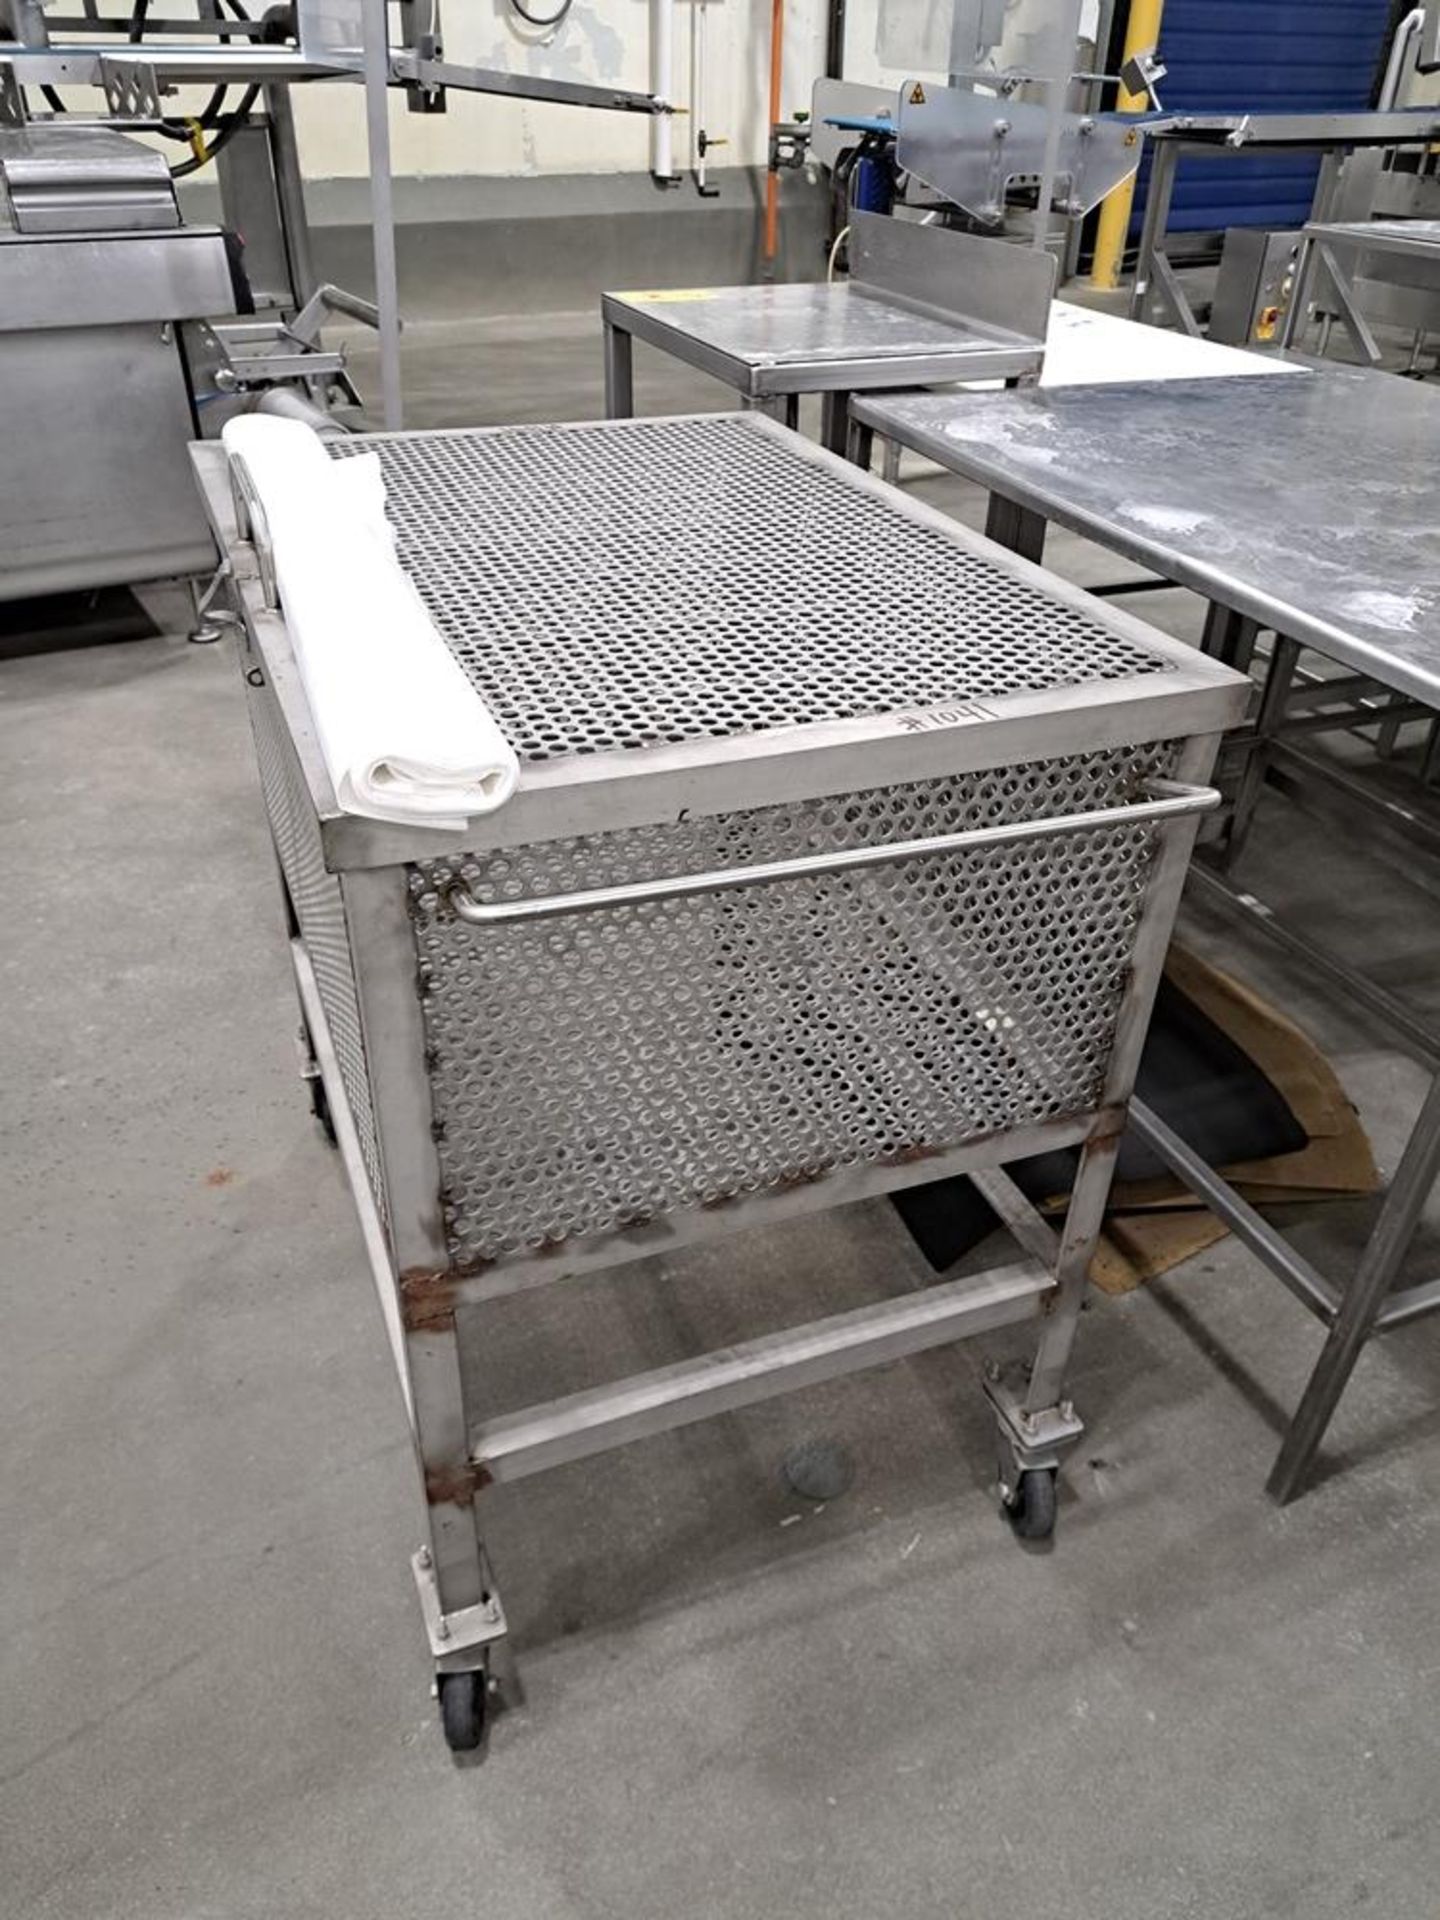 Lot (15) Stainless Steel Tables, (1) Stainless Steel Parts Cart: Required Loading Fee $400.00, - Image 2 of 6